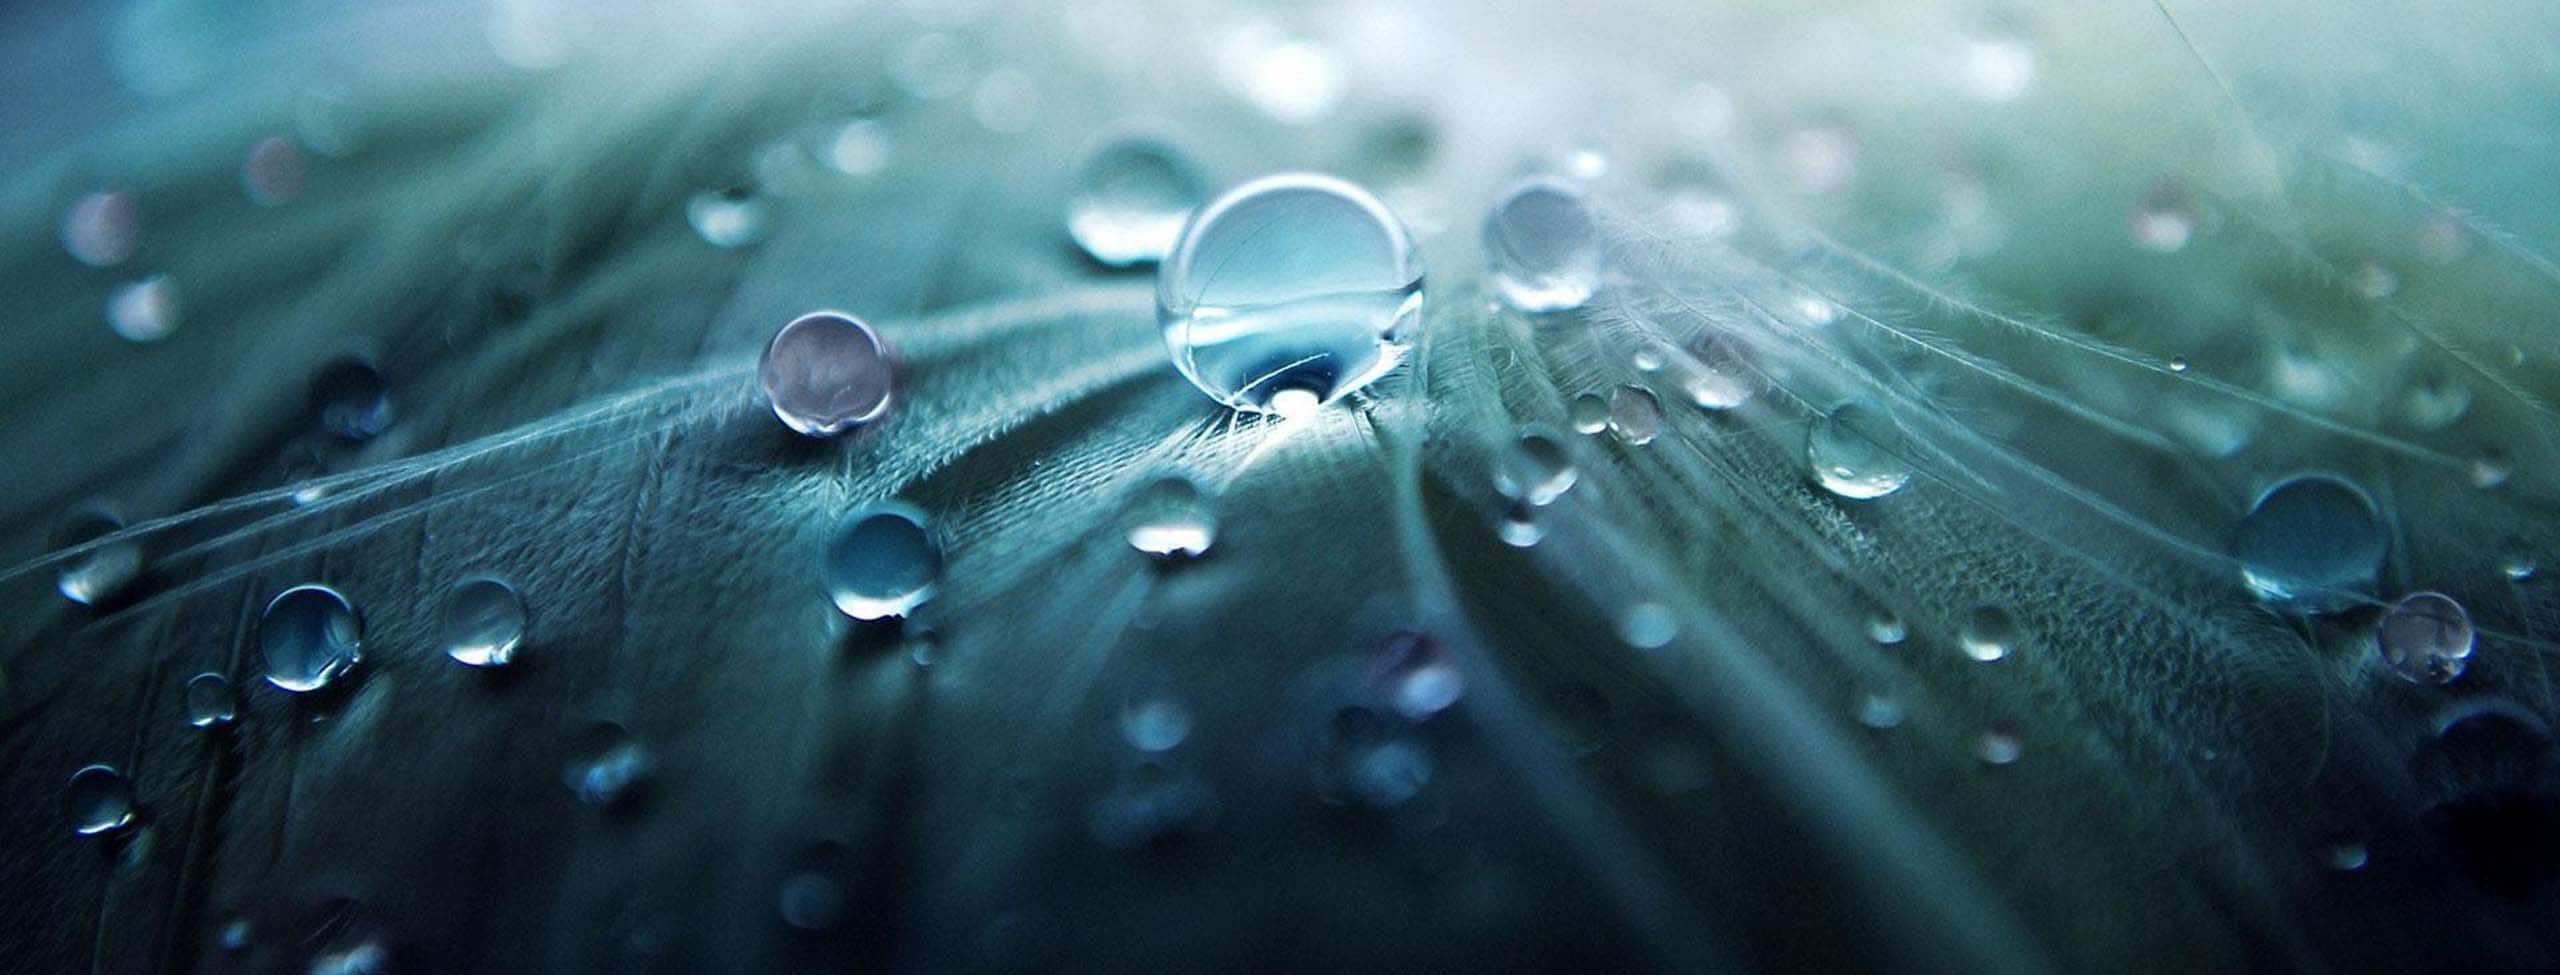 Water_droplets_S_2624